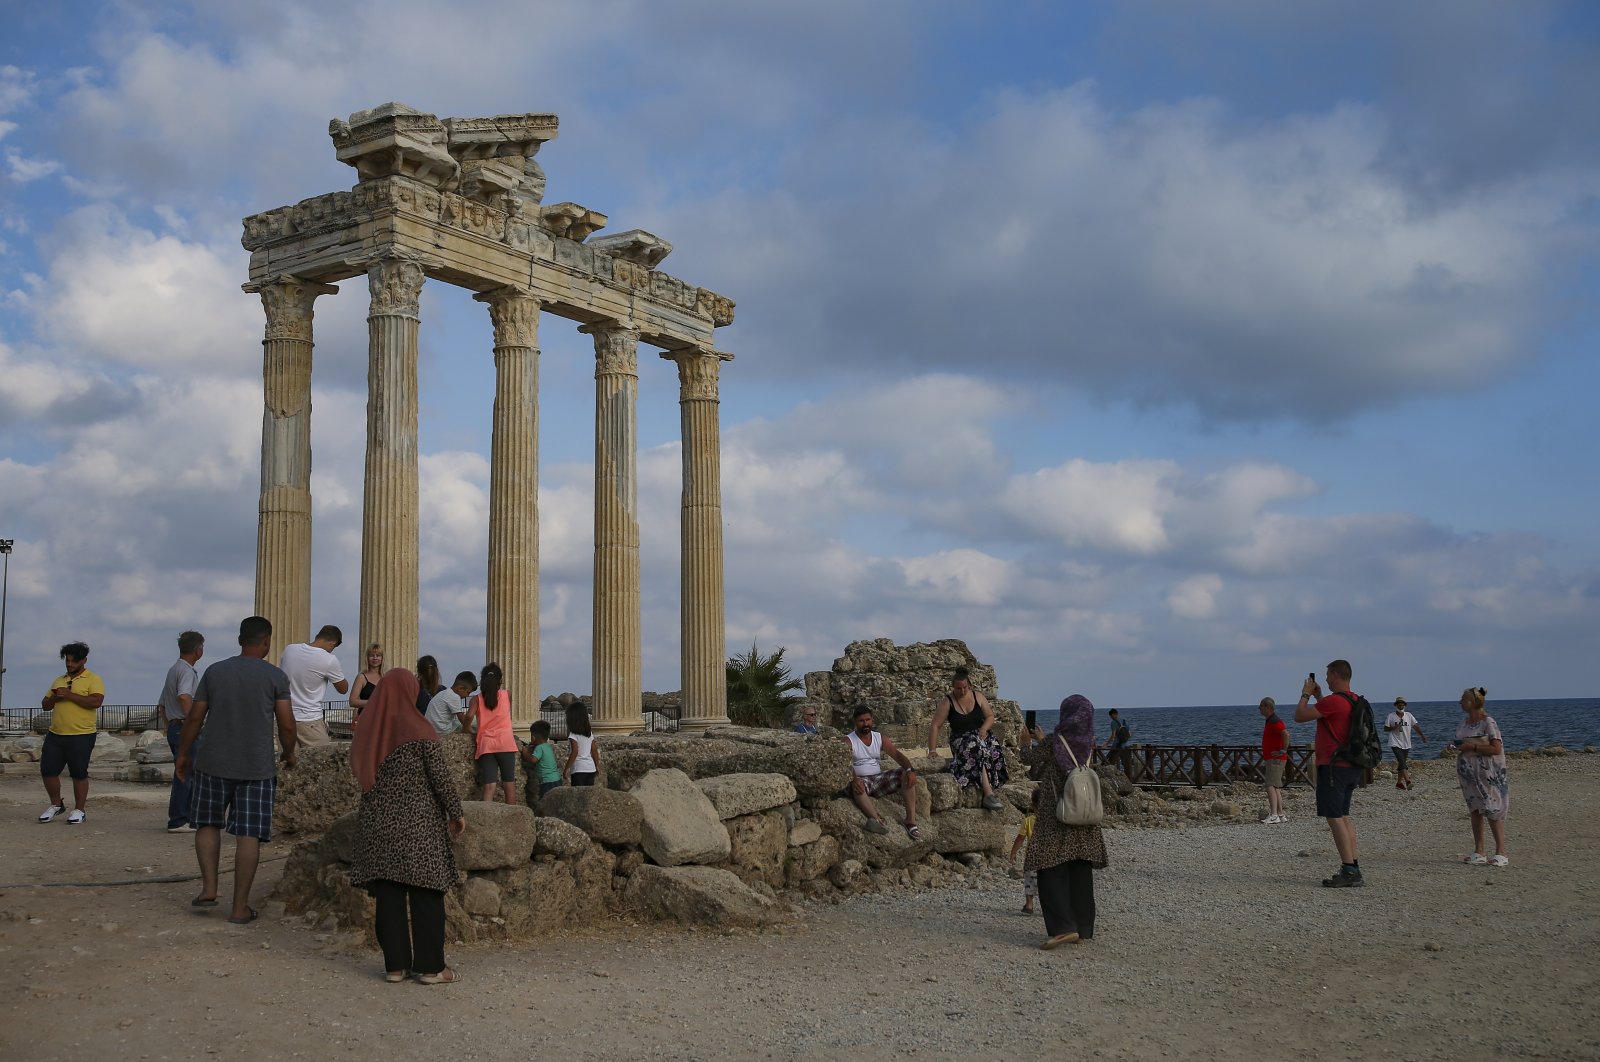 Tourists visit a historic temple in Antalya, southern Turkey, June 20, 2021. (AP Photo)